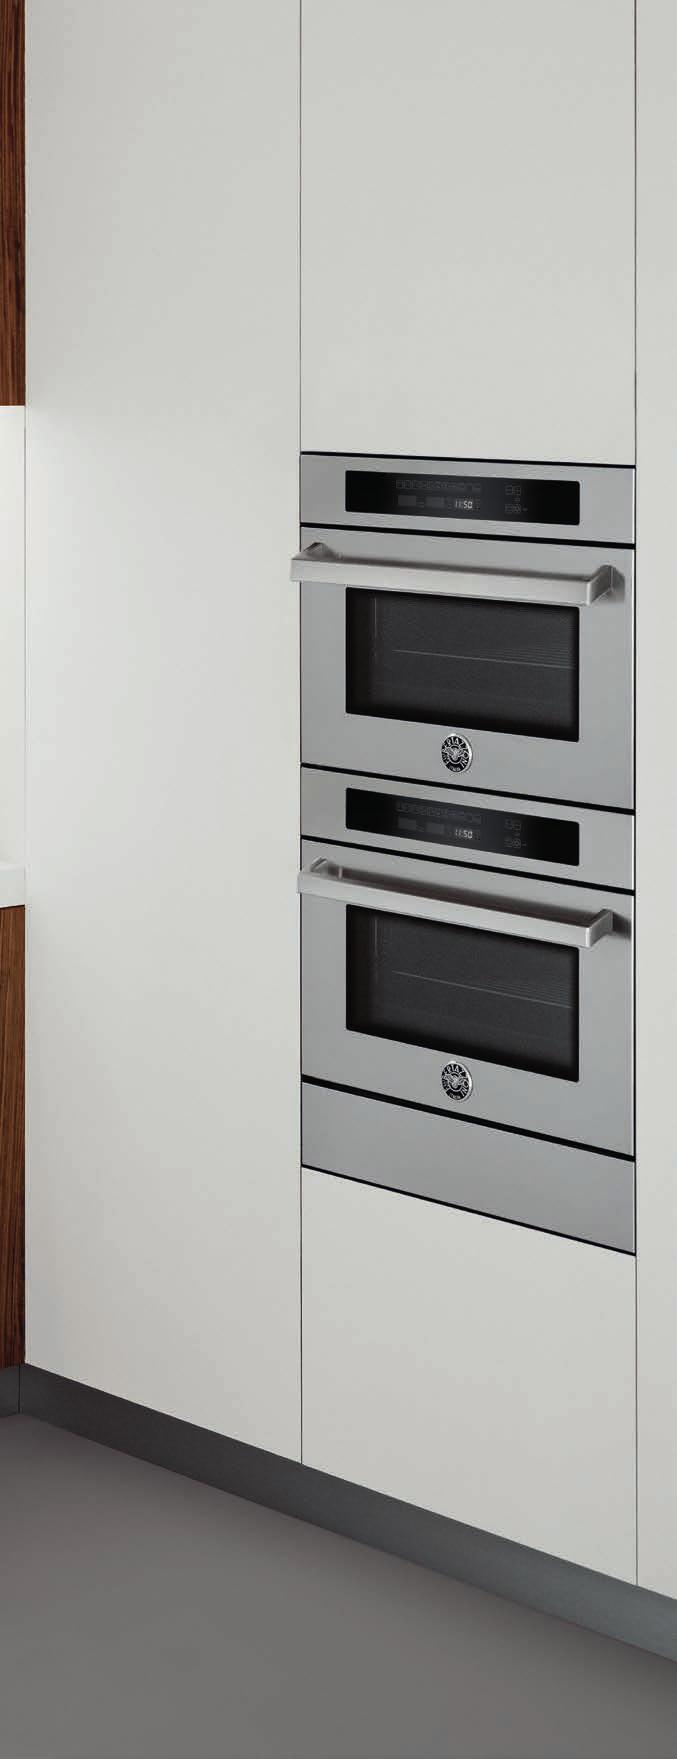 19 Combi-microwaves With its 38 litres family-sized capacity, the combined multi-function electric and microwave oven has convection, regular or grill heating modes with a microwave boost function to